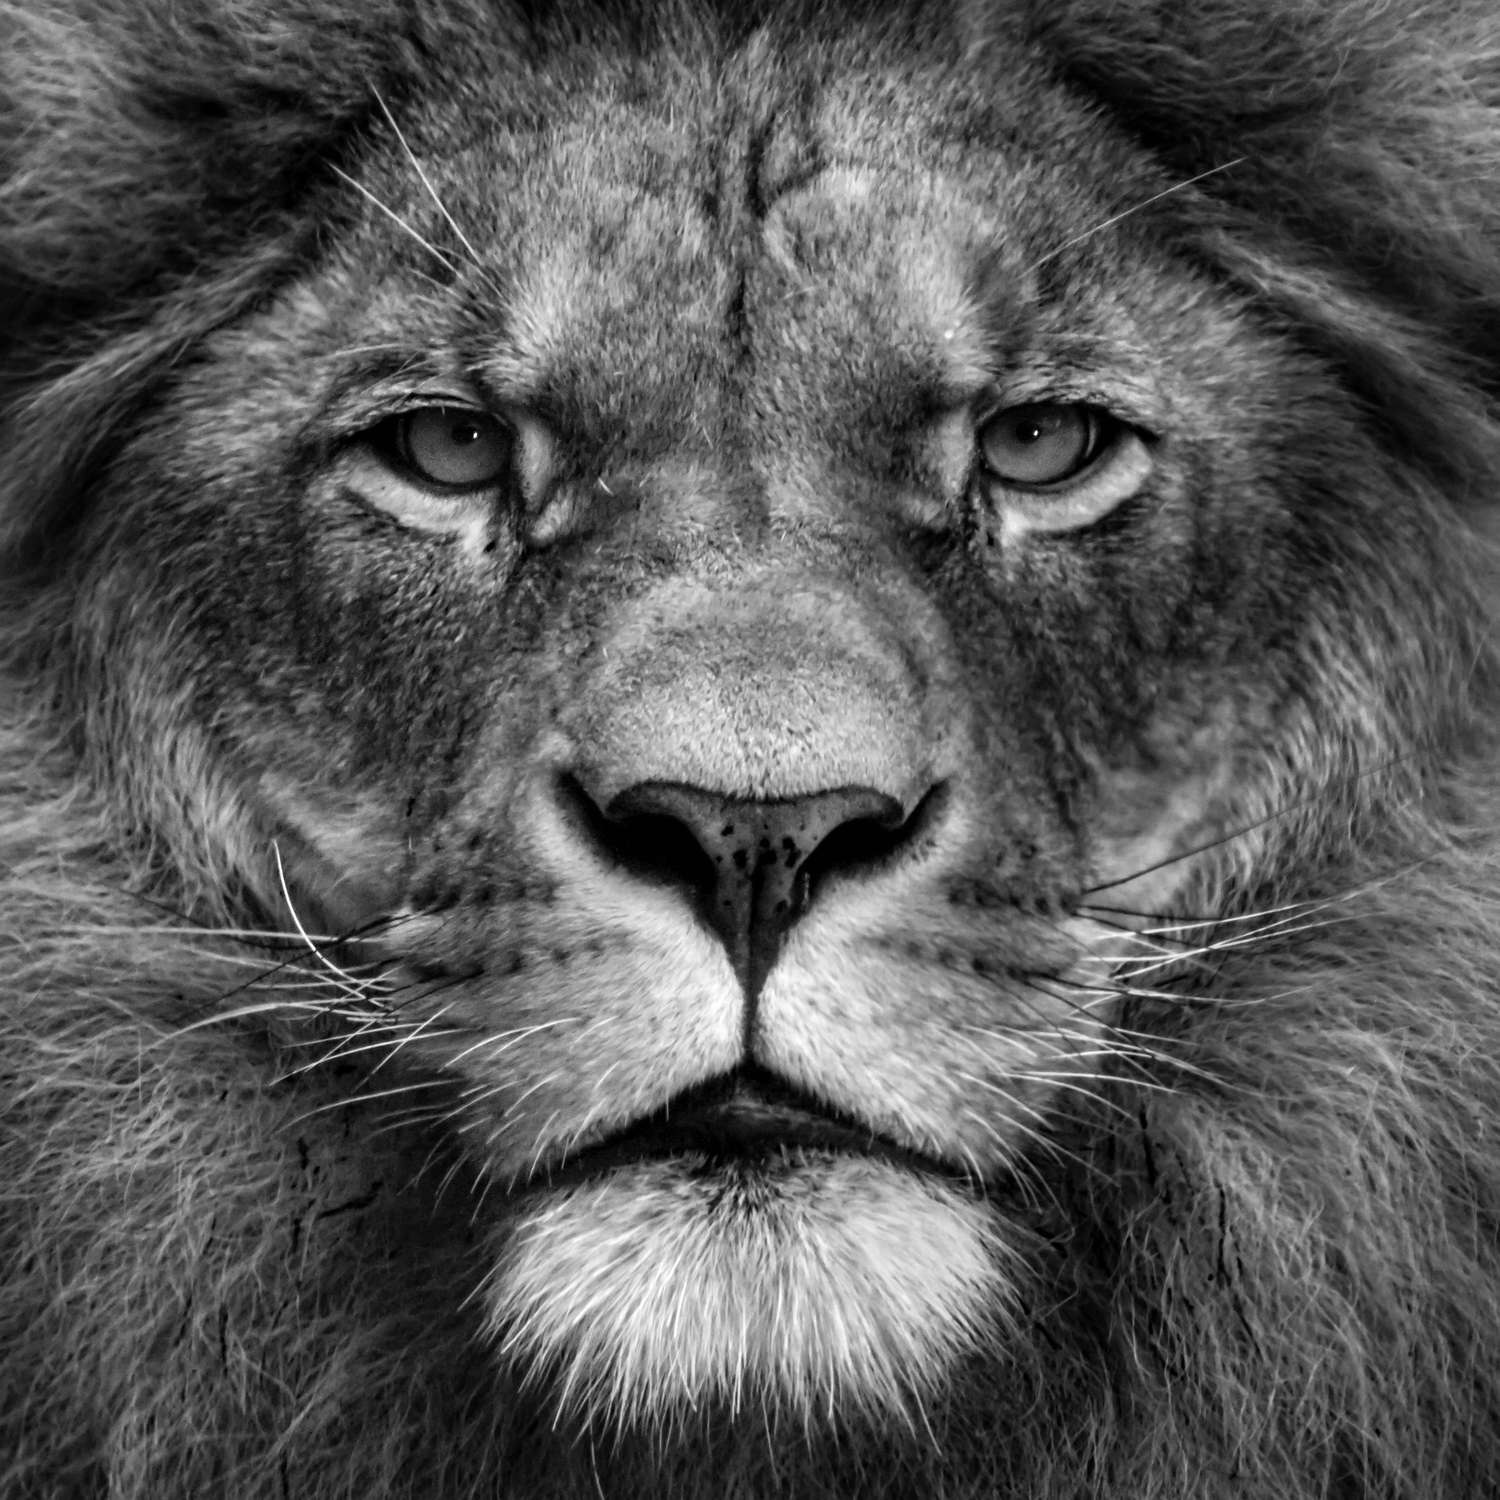             Photo wallpaper lion face close up - black and white
        